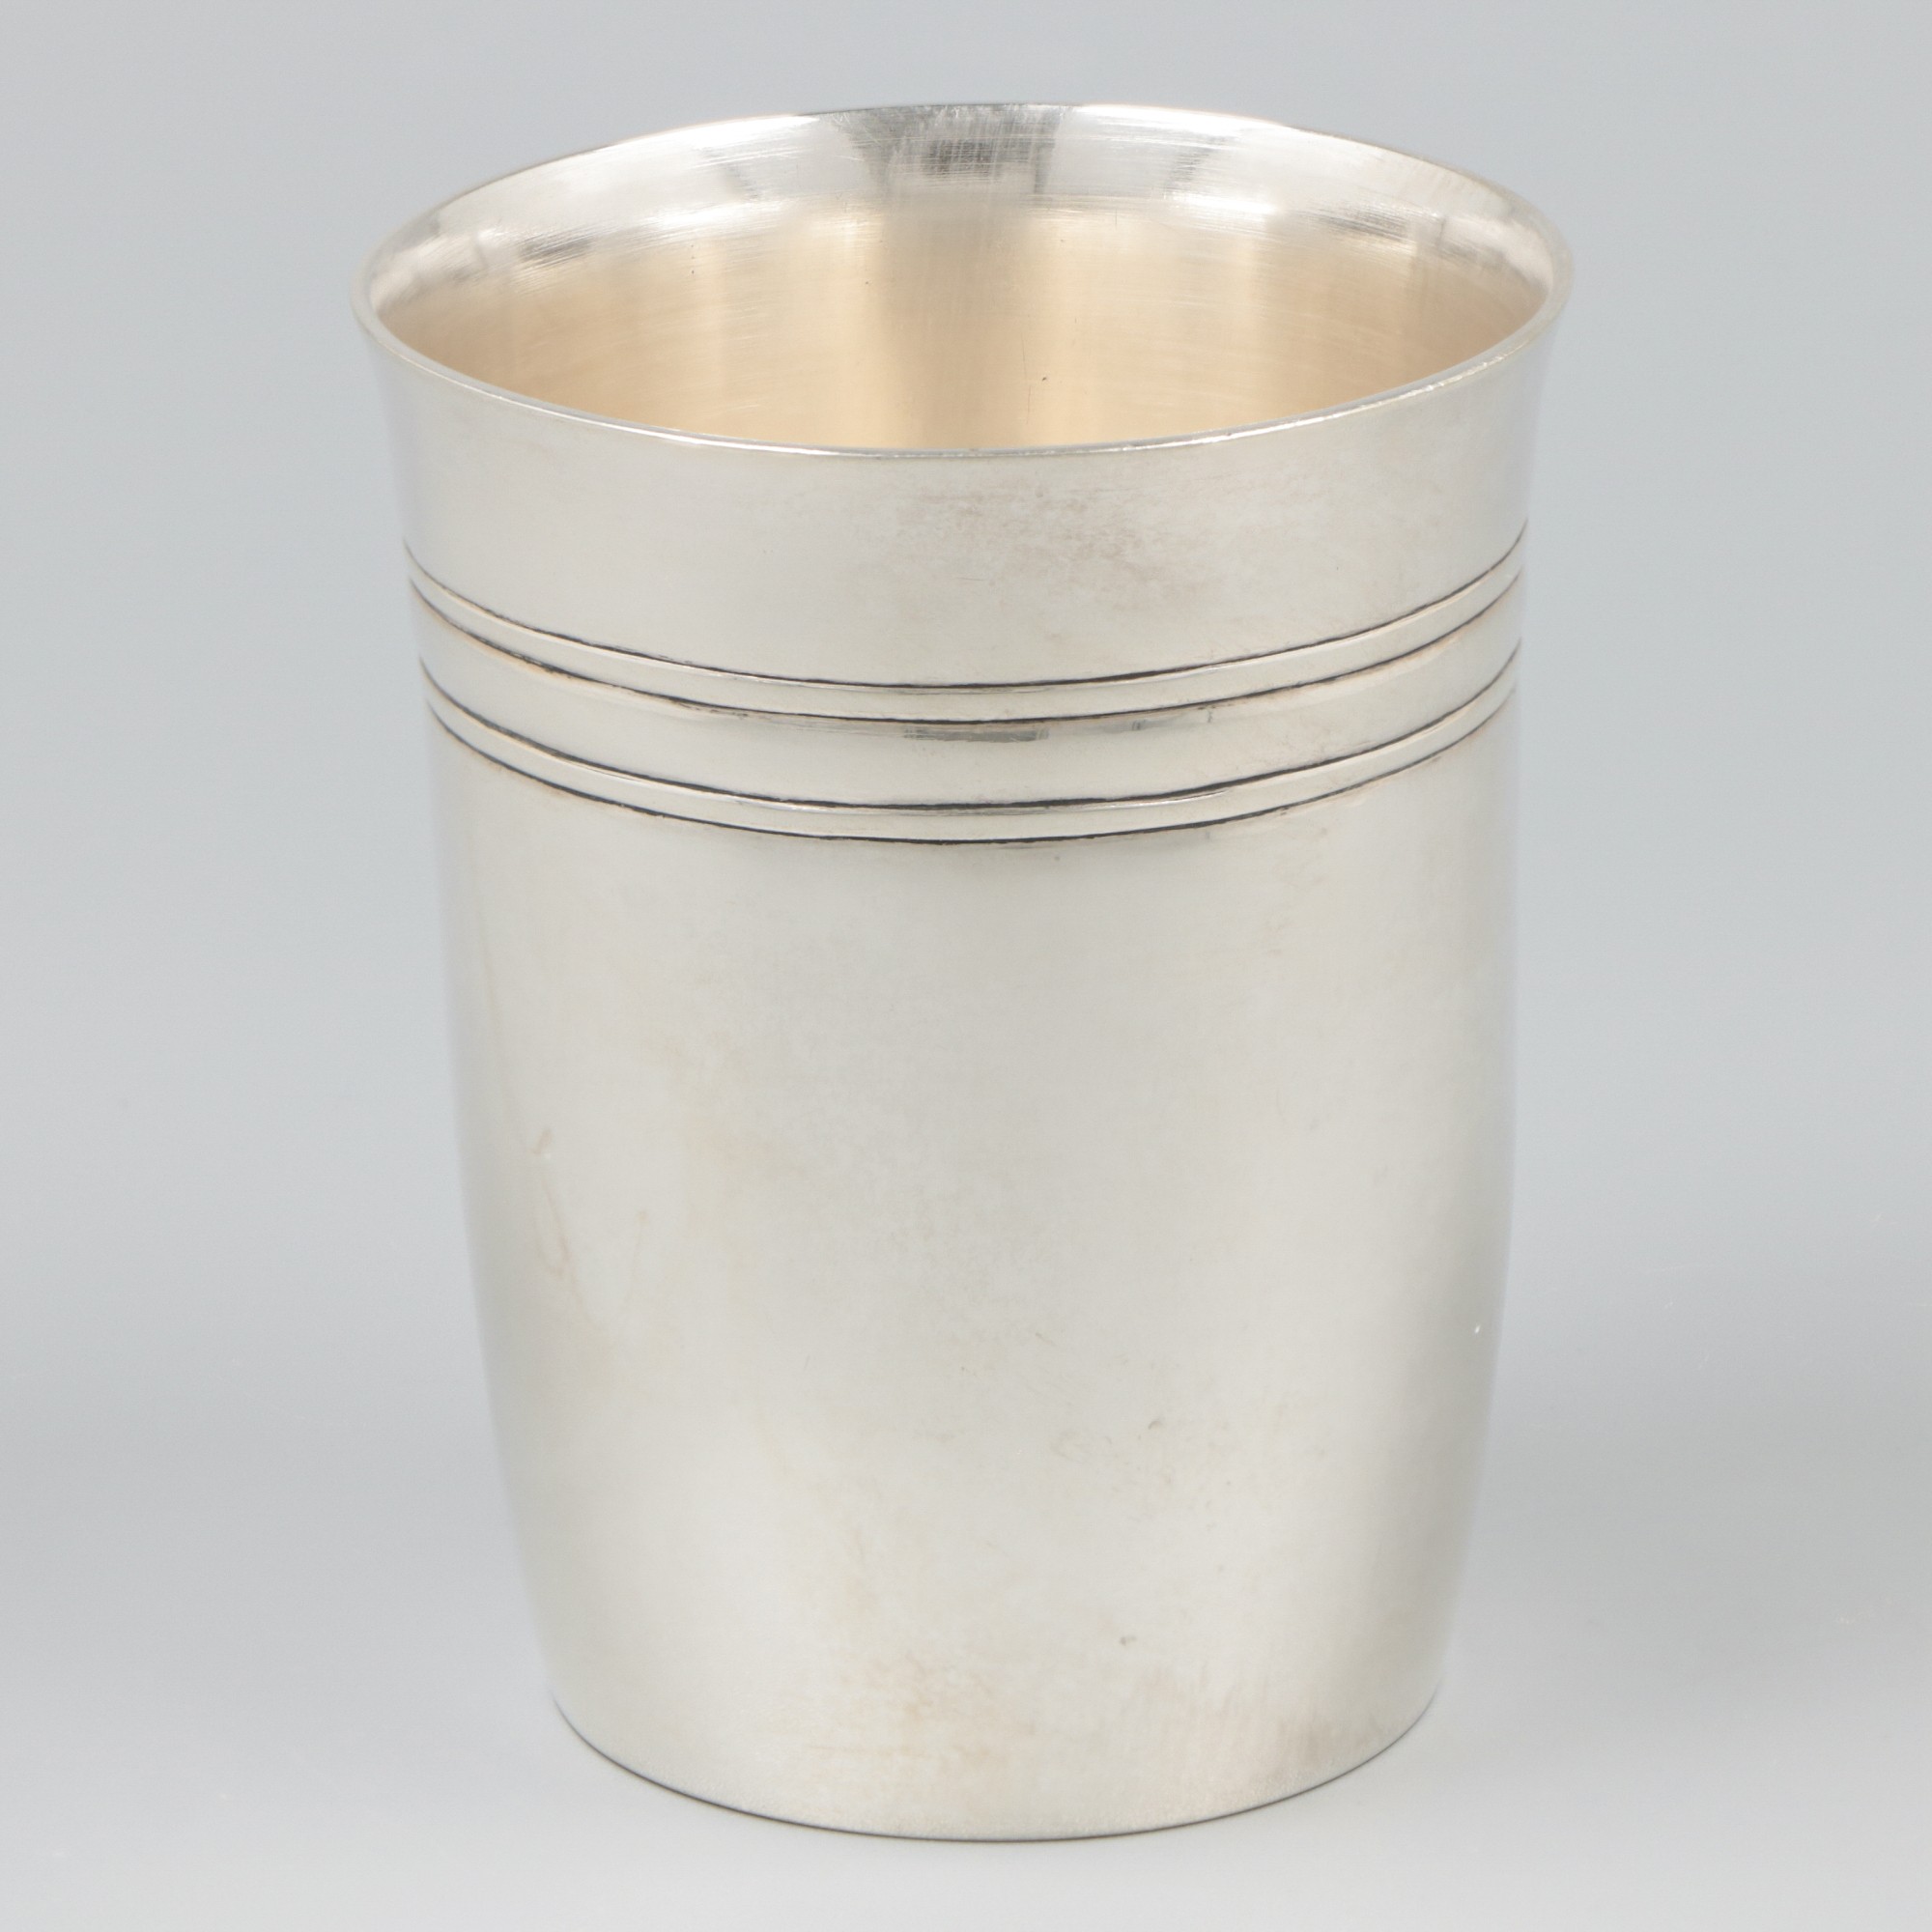 Drinking cup silver. - Image 2 of 5